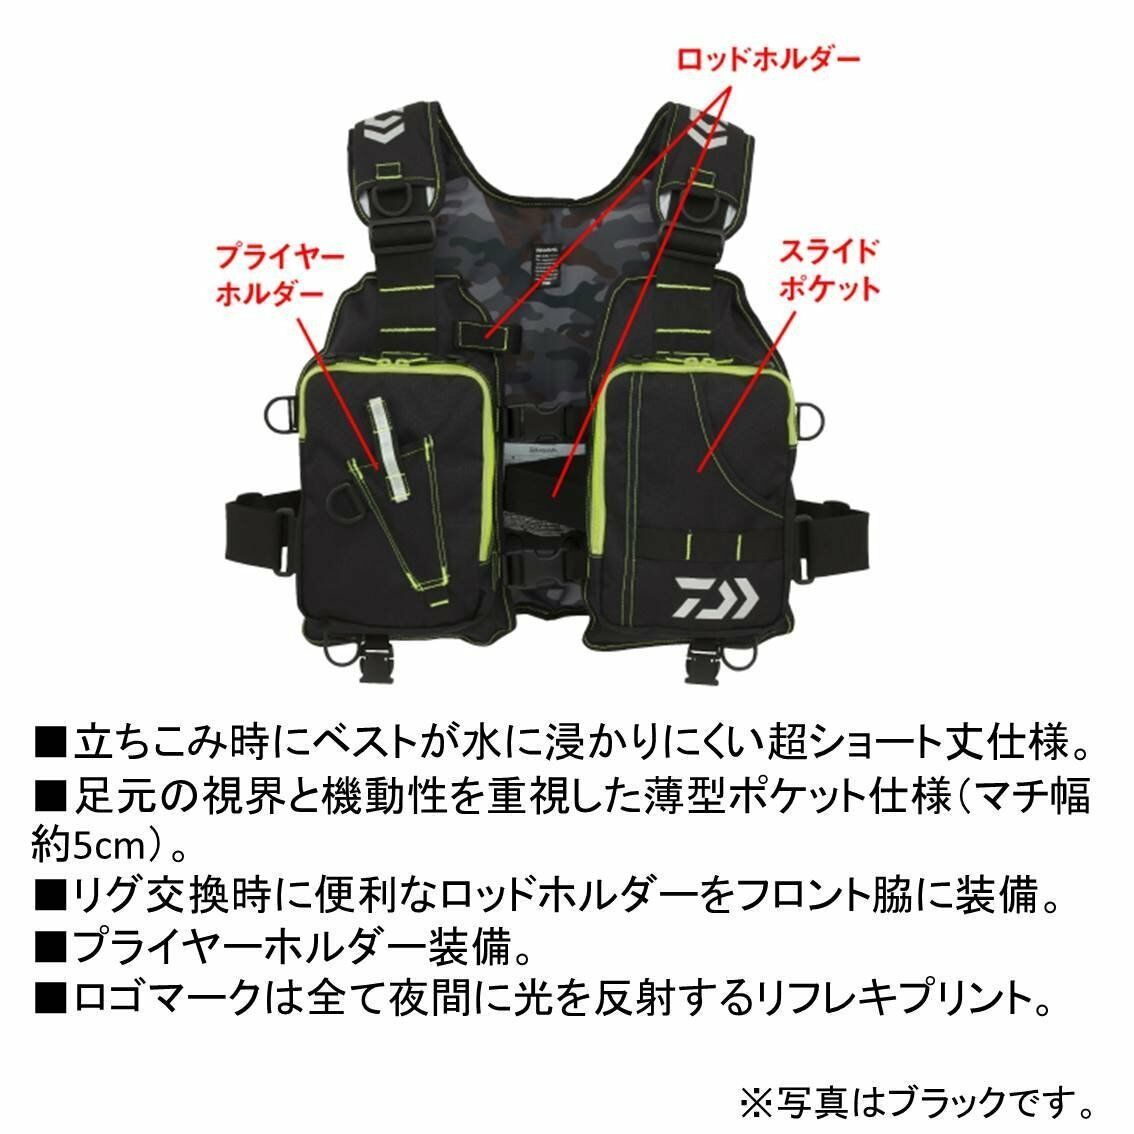 Vests Daiwa Floating Fishing Game Vest Life Preserver Black Red Df 66 Free Size Vests Clothing Shoes Accessories